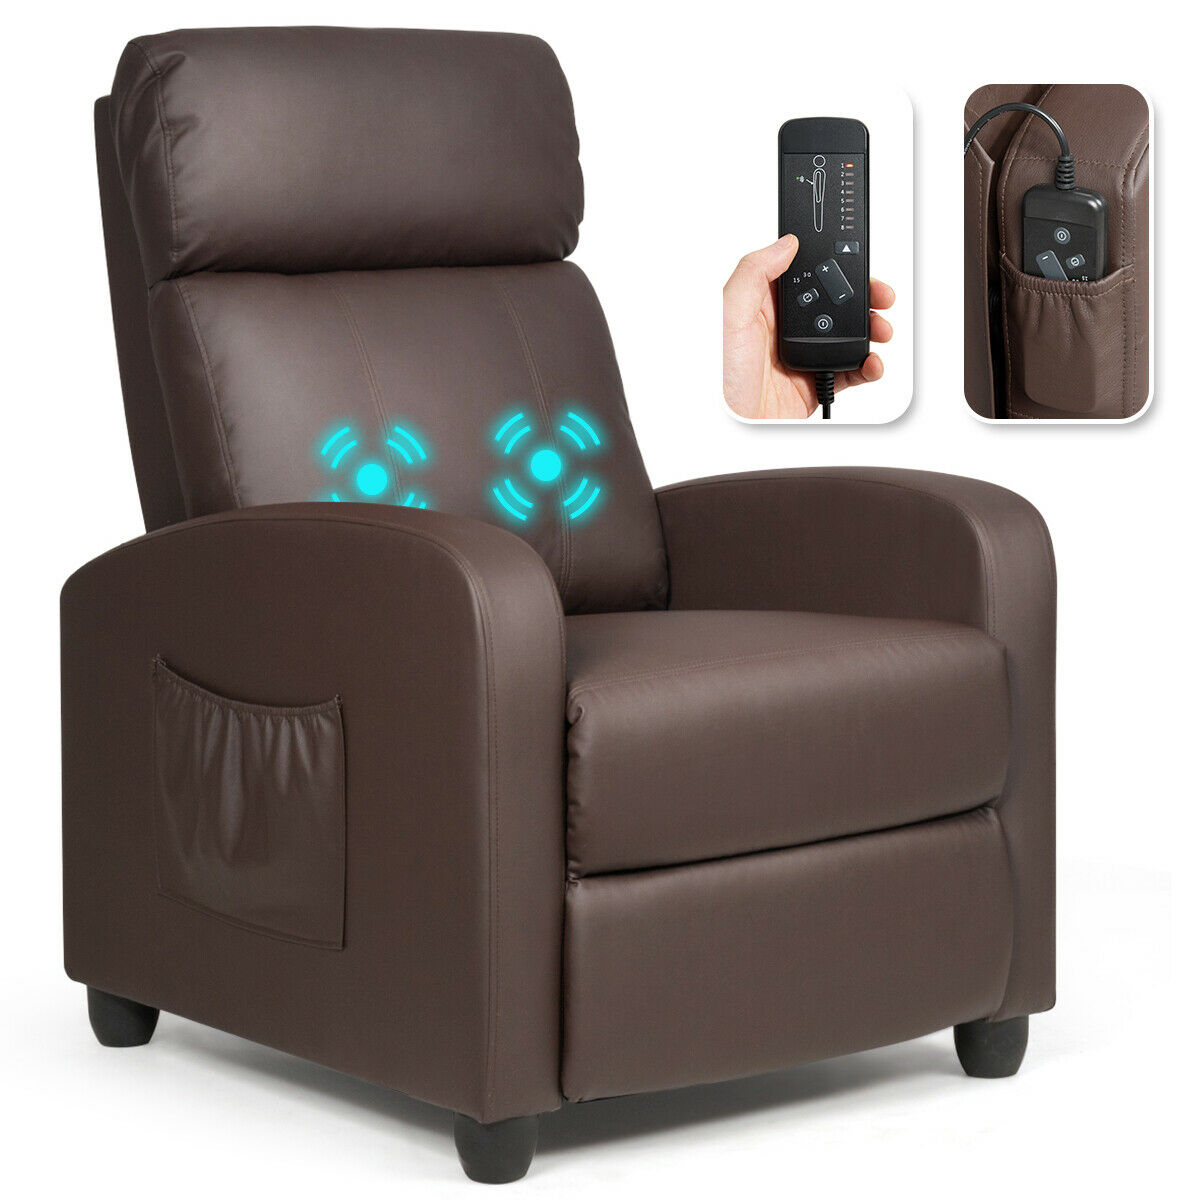 Massage Recliner Chair Single Sofa Padded Seat W/ Footrest - Brown